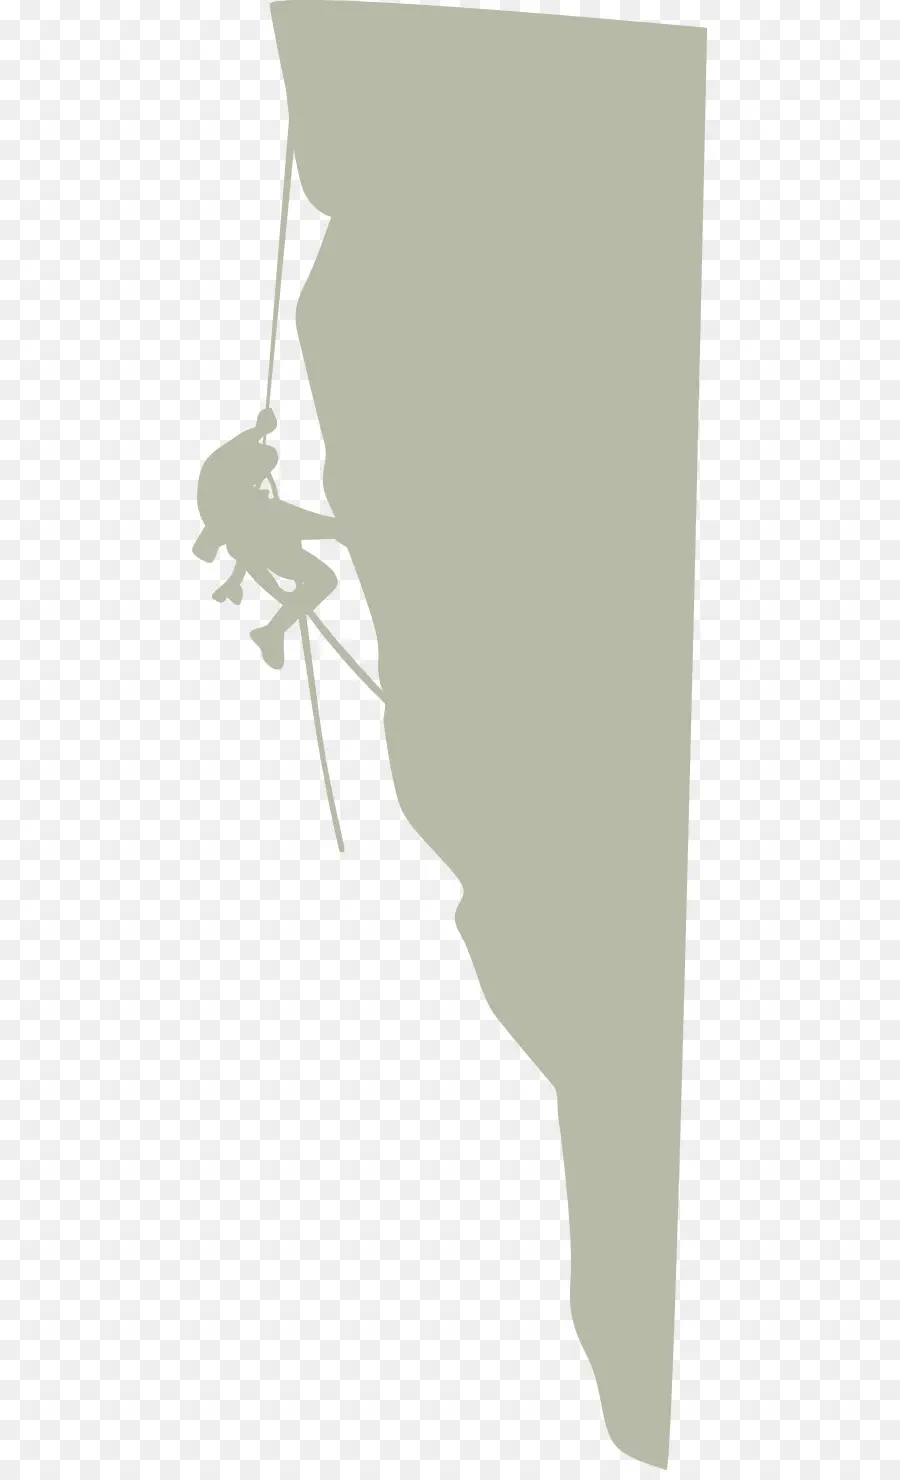 Silhouette，Sport PNG